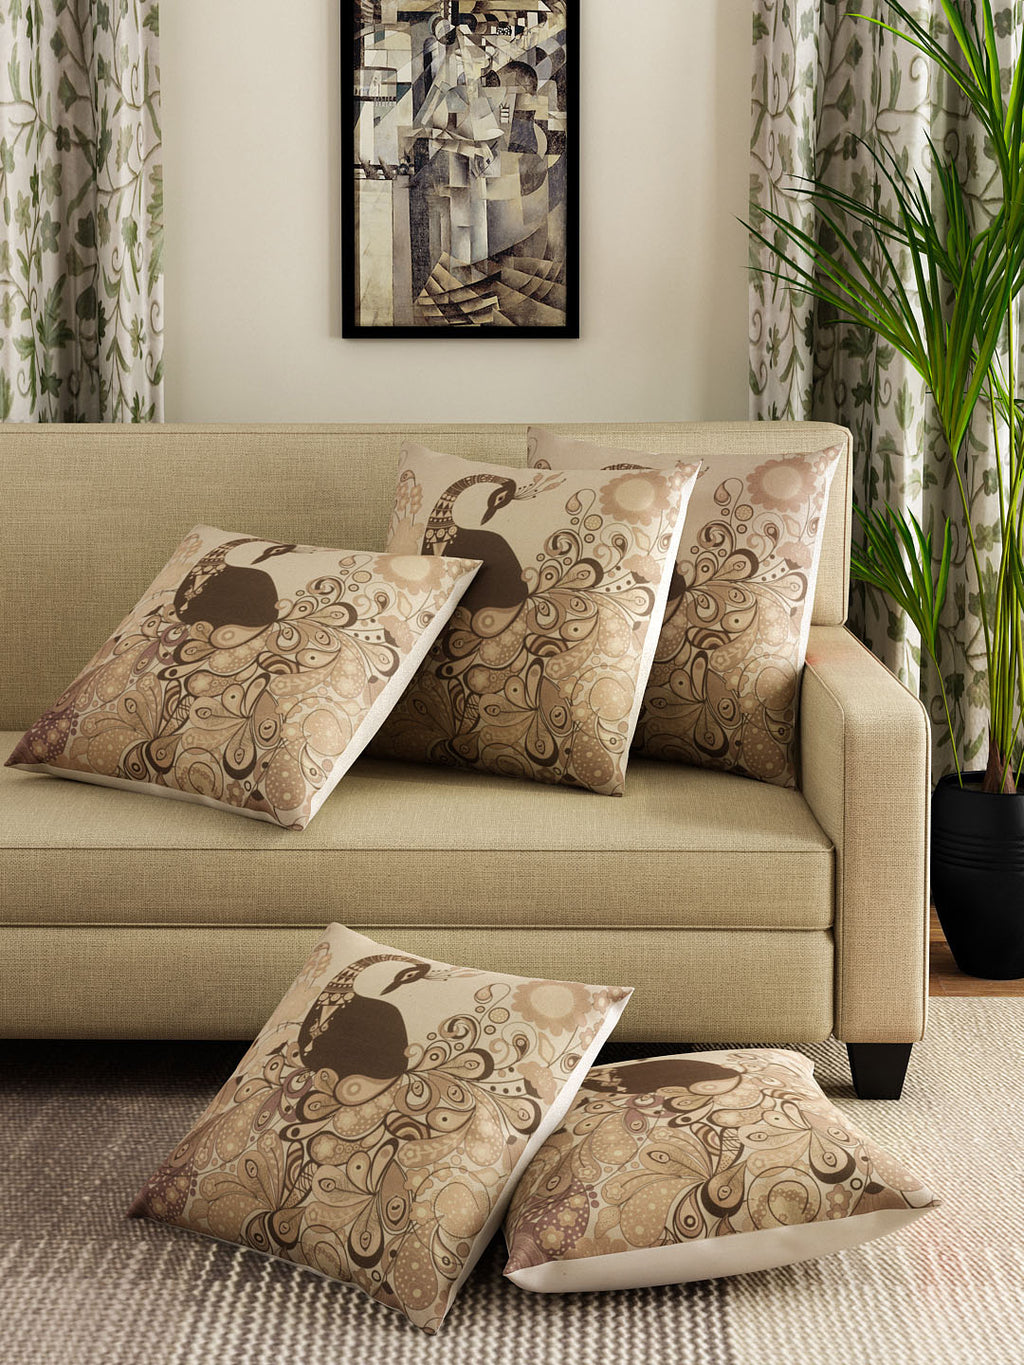 Detec™ Hosta Beige 16 x 16 inches Printed Cushion Cover (Set of 5 )